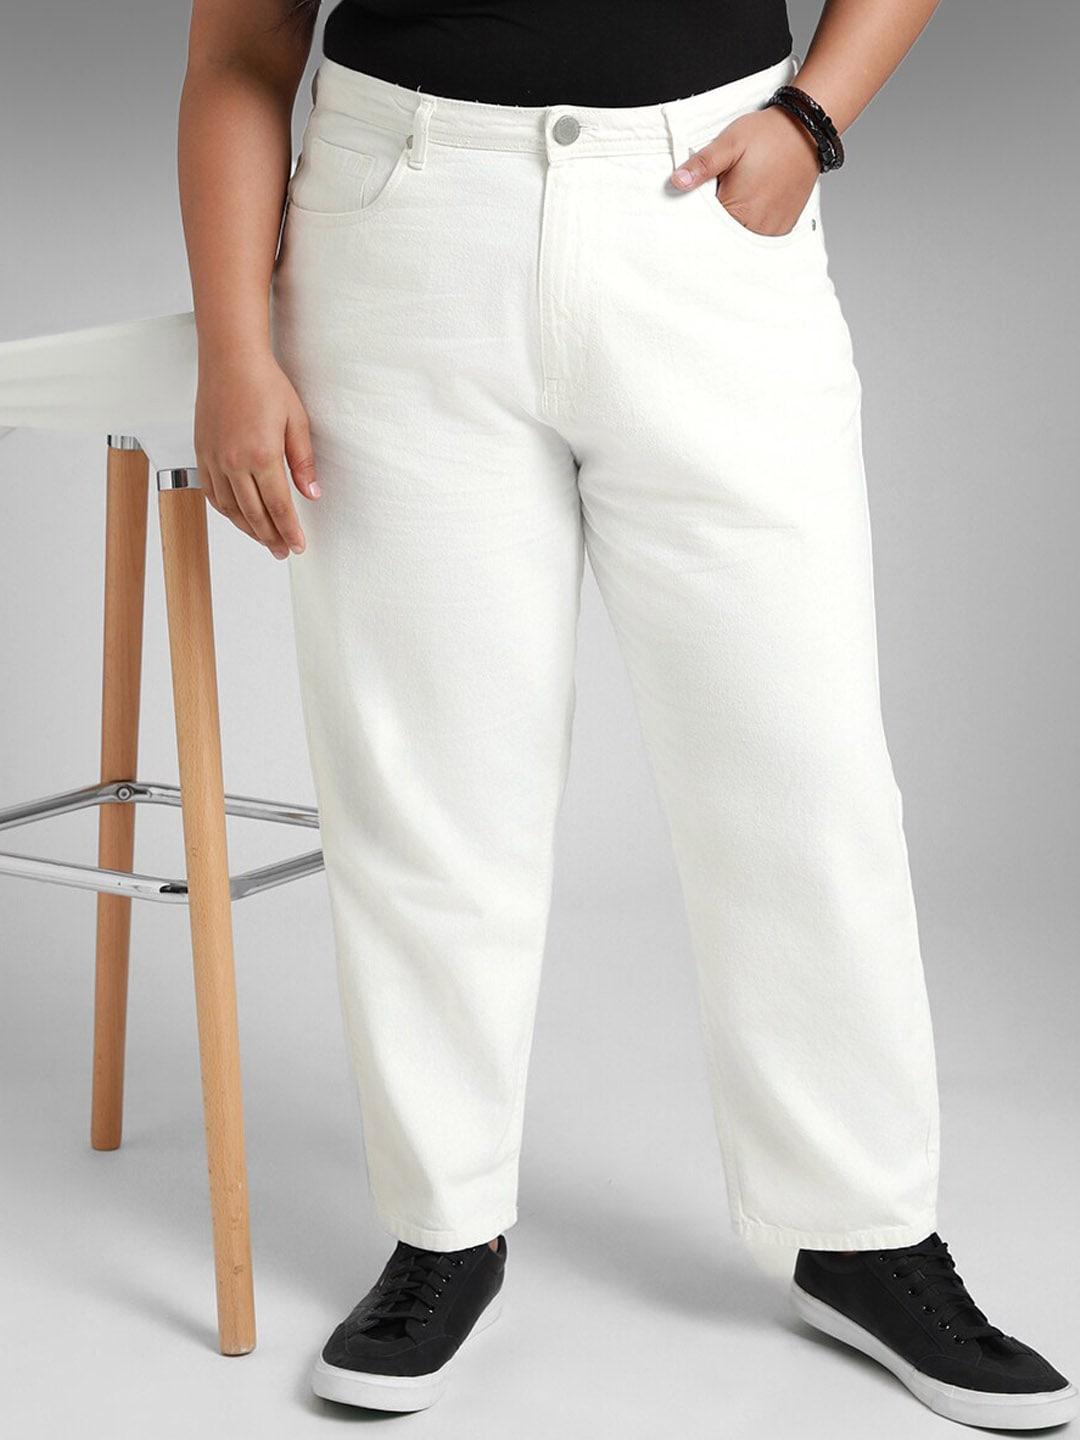 freeform by high star women white high-rise jeans